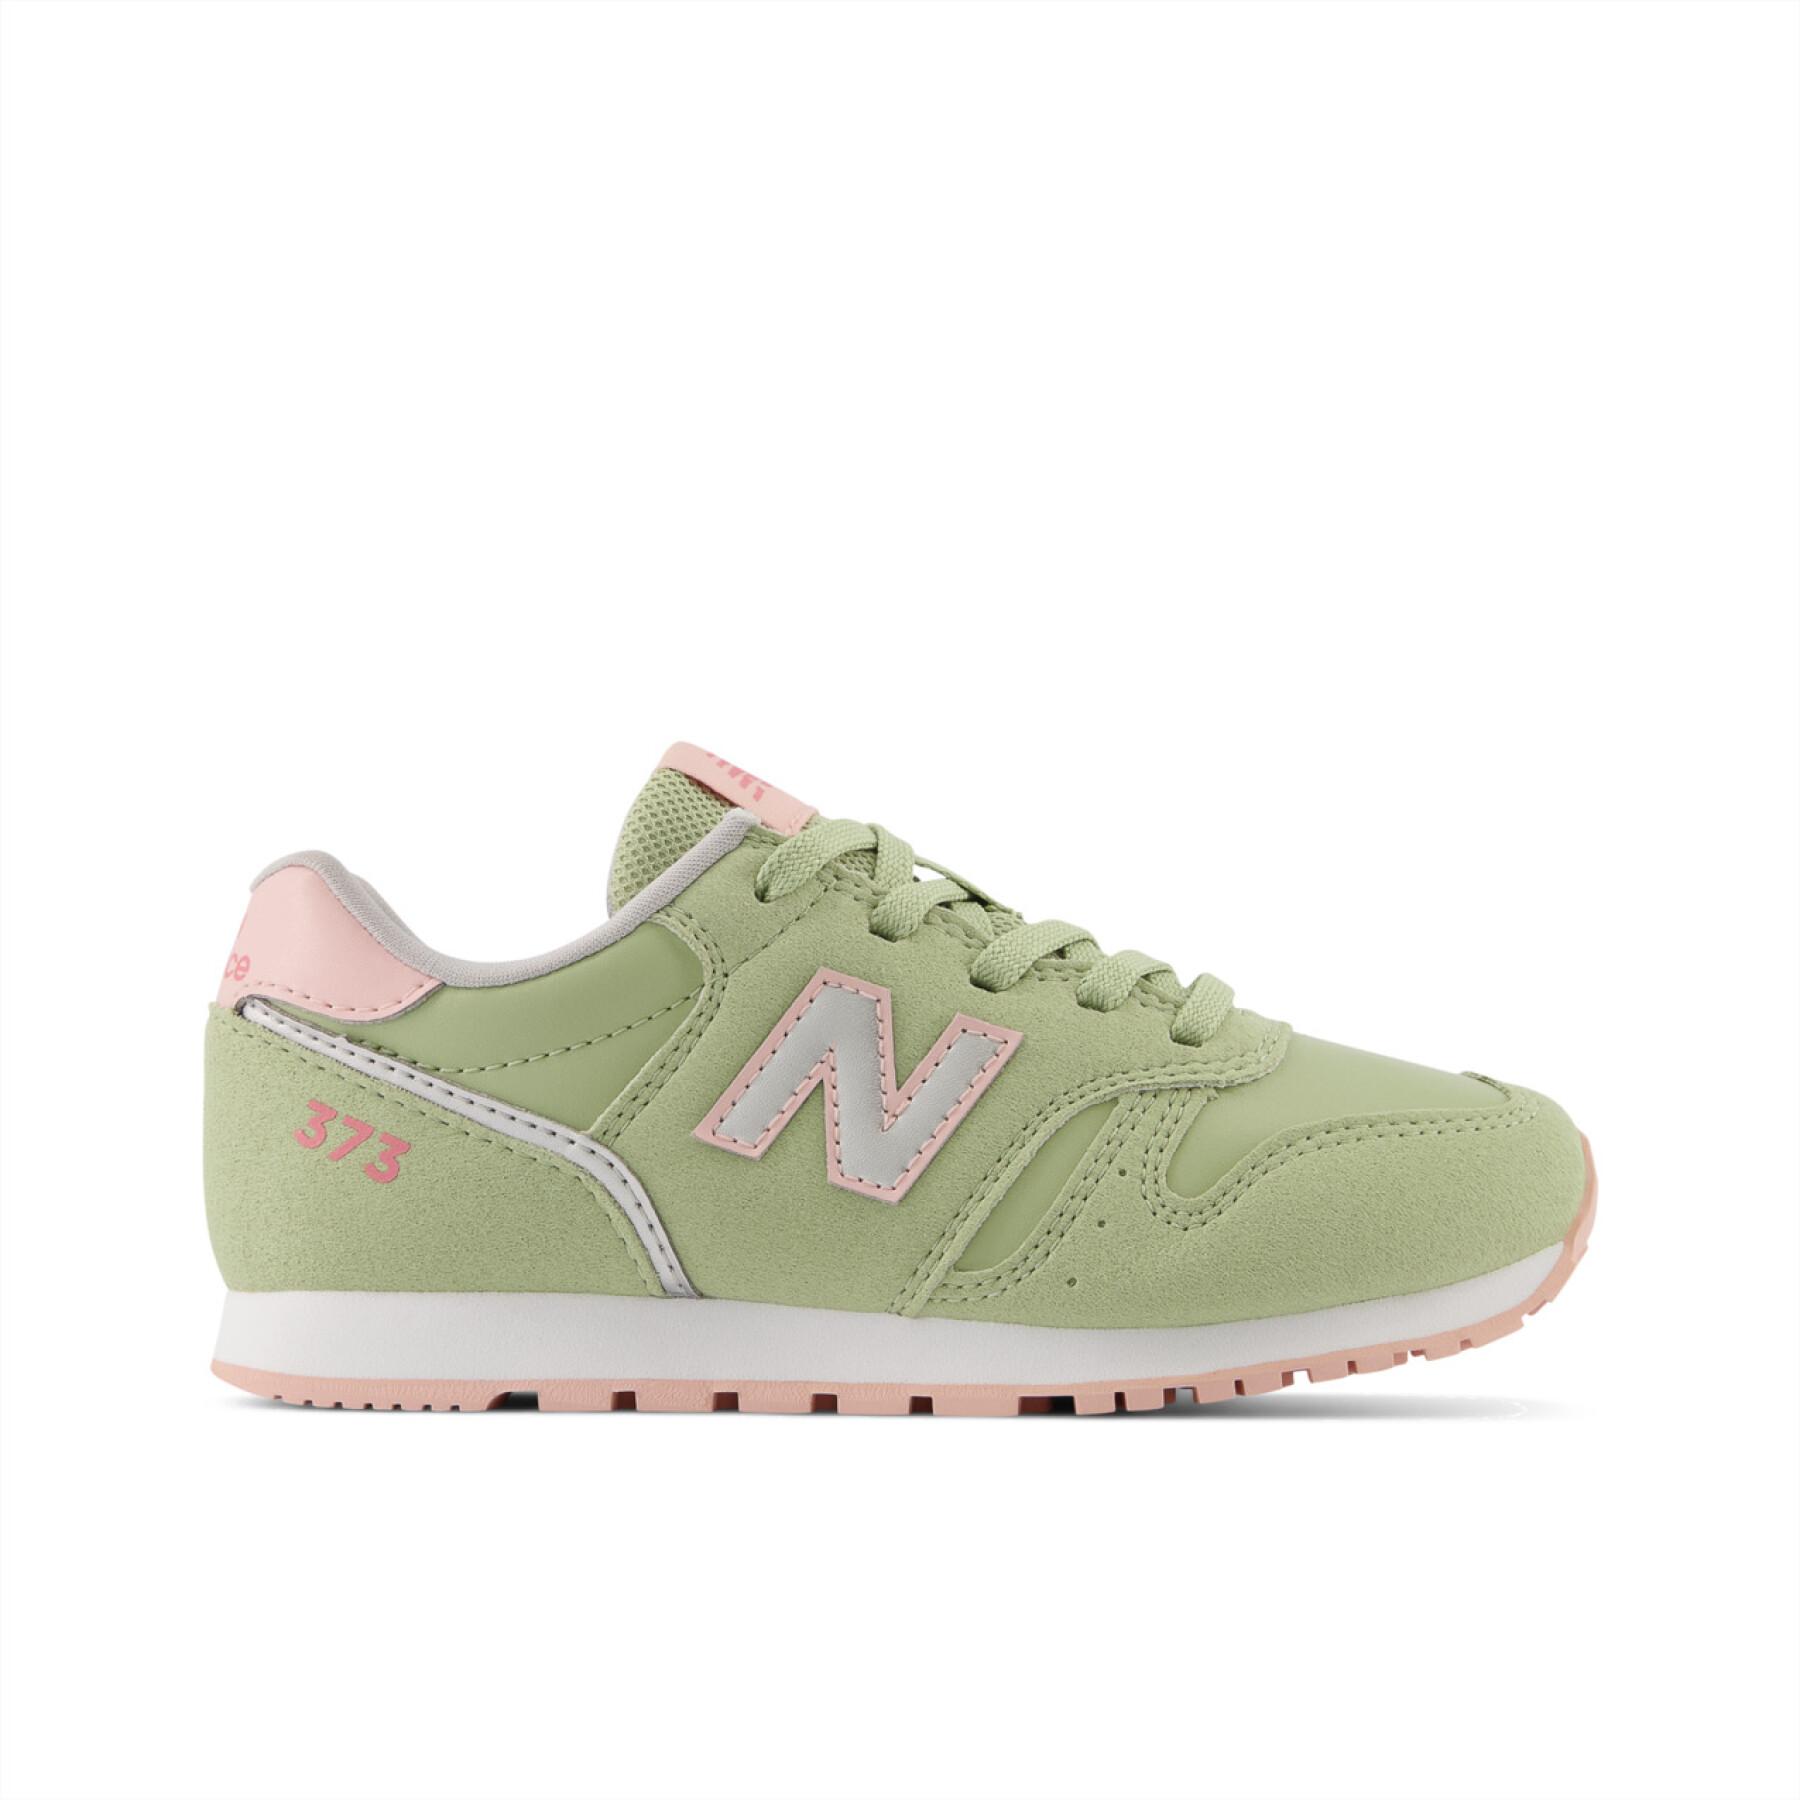 Children's sneakers New Balance 373 Lace